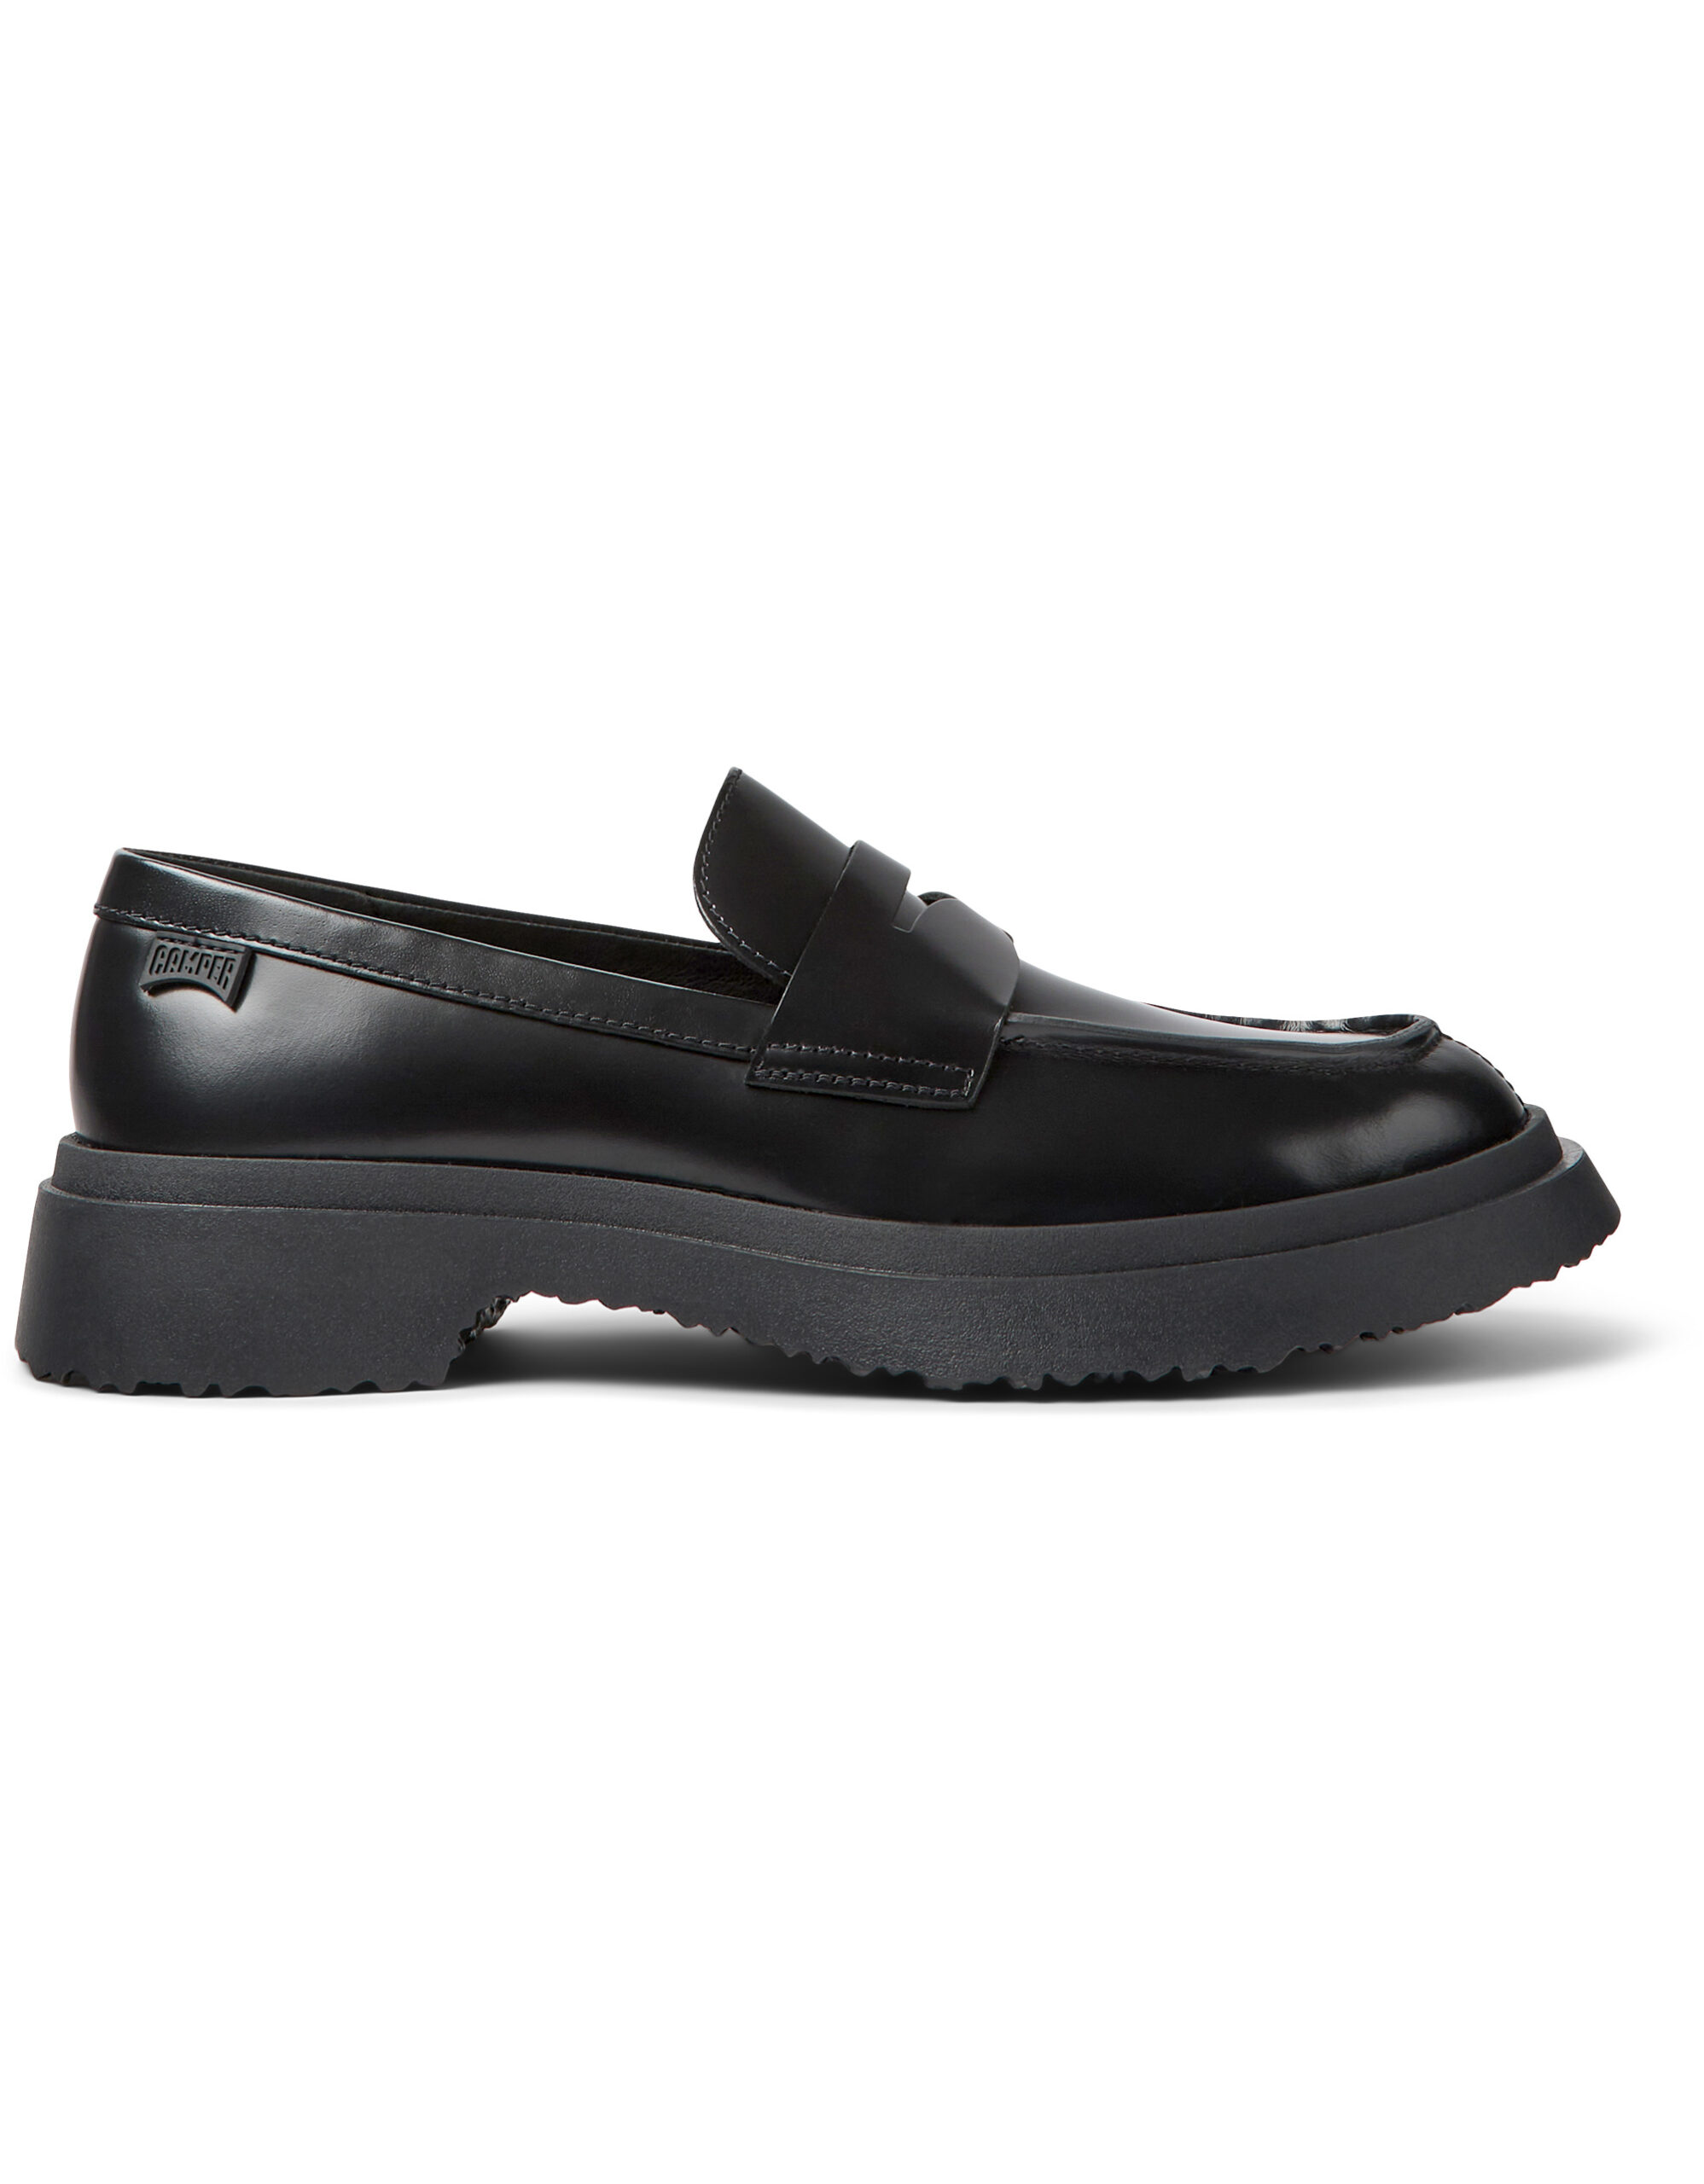 Walden Black Formal Shoes for Women - Fall/Winter collection